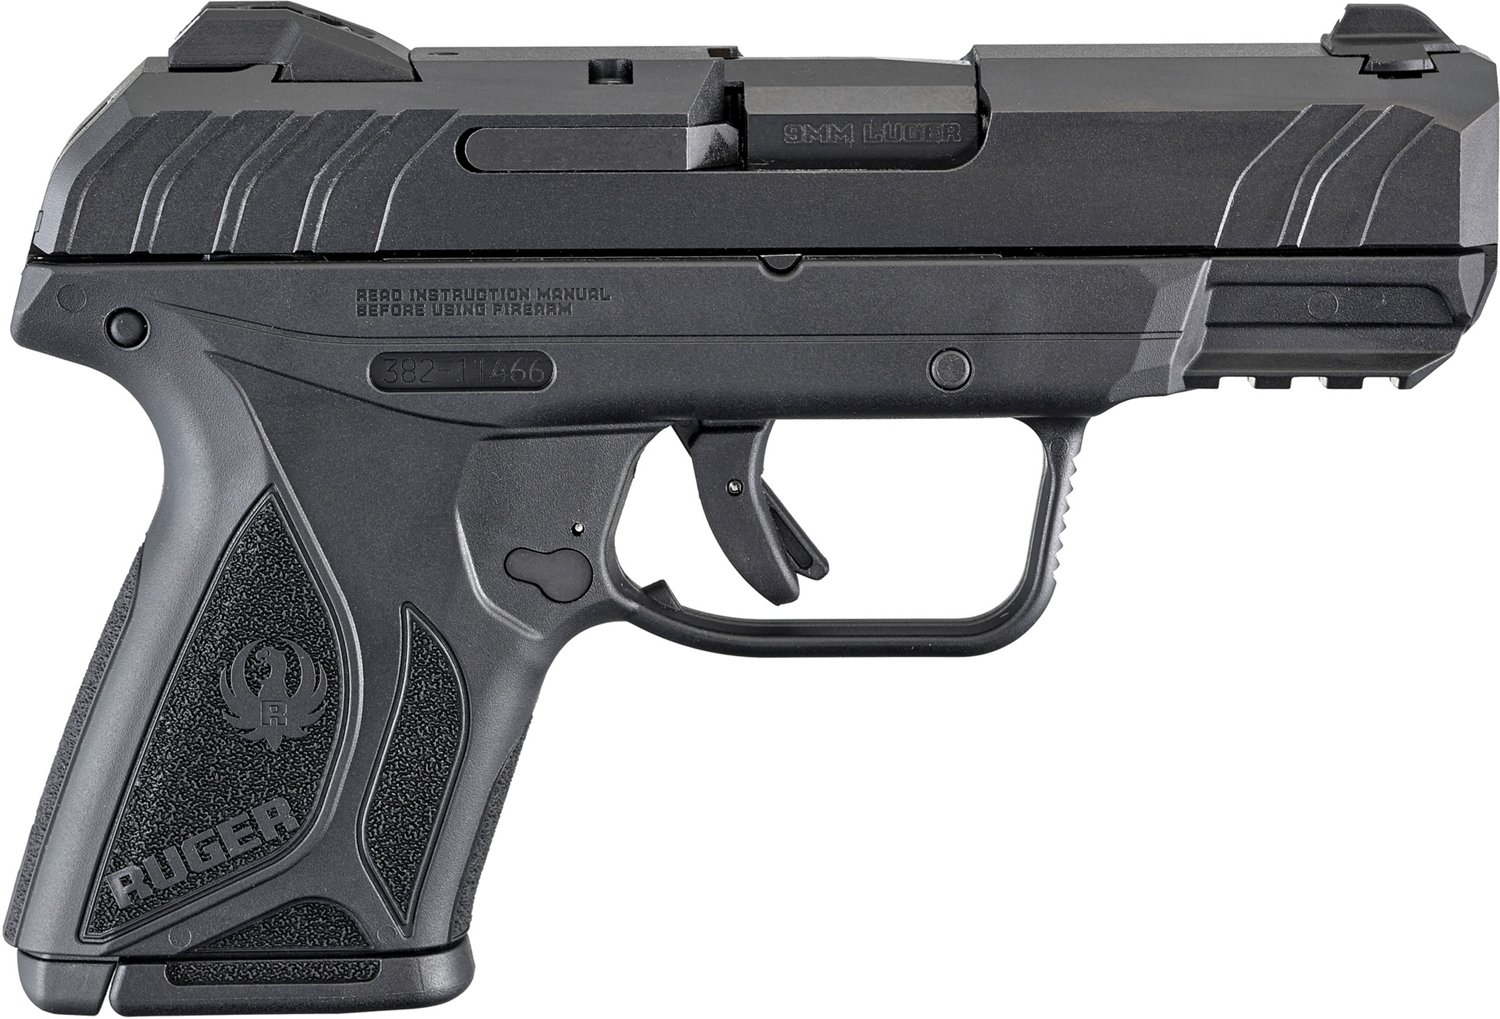 Ruger Security 9 Compact 9mm Pistol Academy